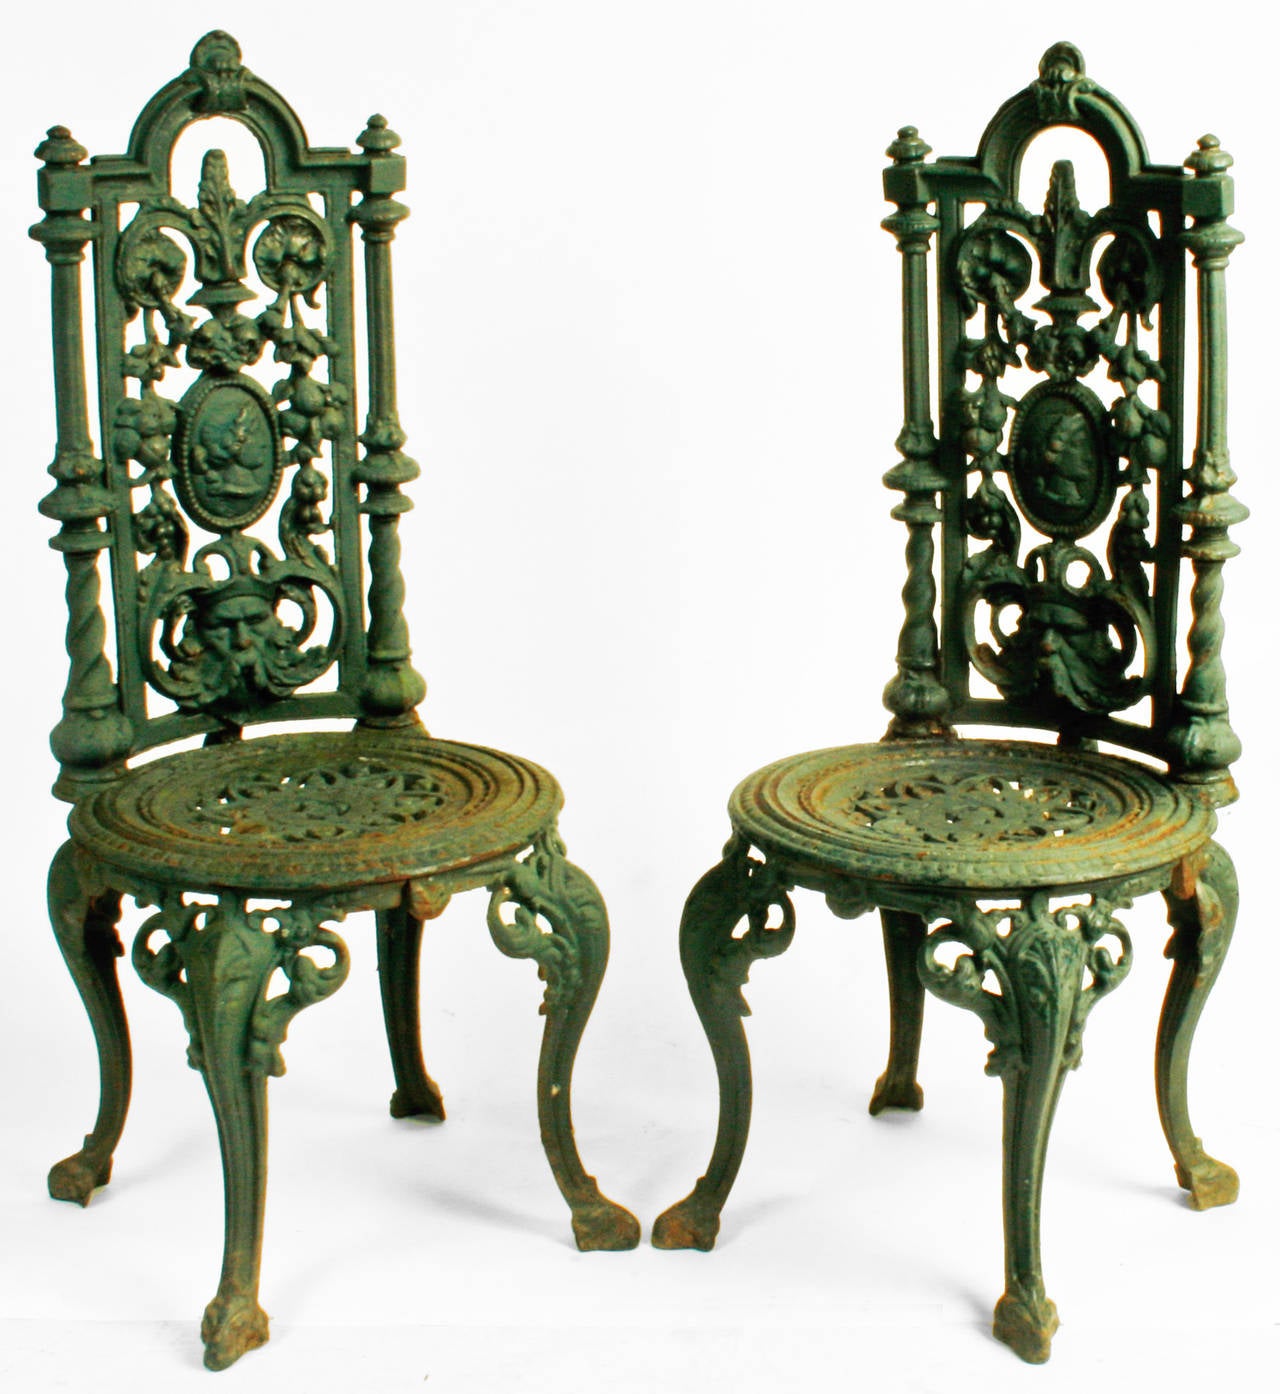 Pair of Victorian finely cast iron and green painted garden chairs. The chair backs are decorated with a central medallion of Aphrodite the Greek Goddess of beauty. She is surrounded by scrolling leaves, cascading fruit and Father Wind. The seats